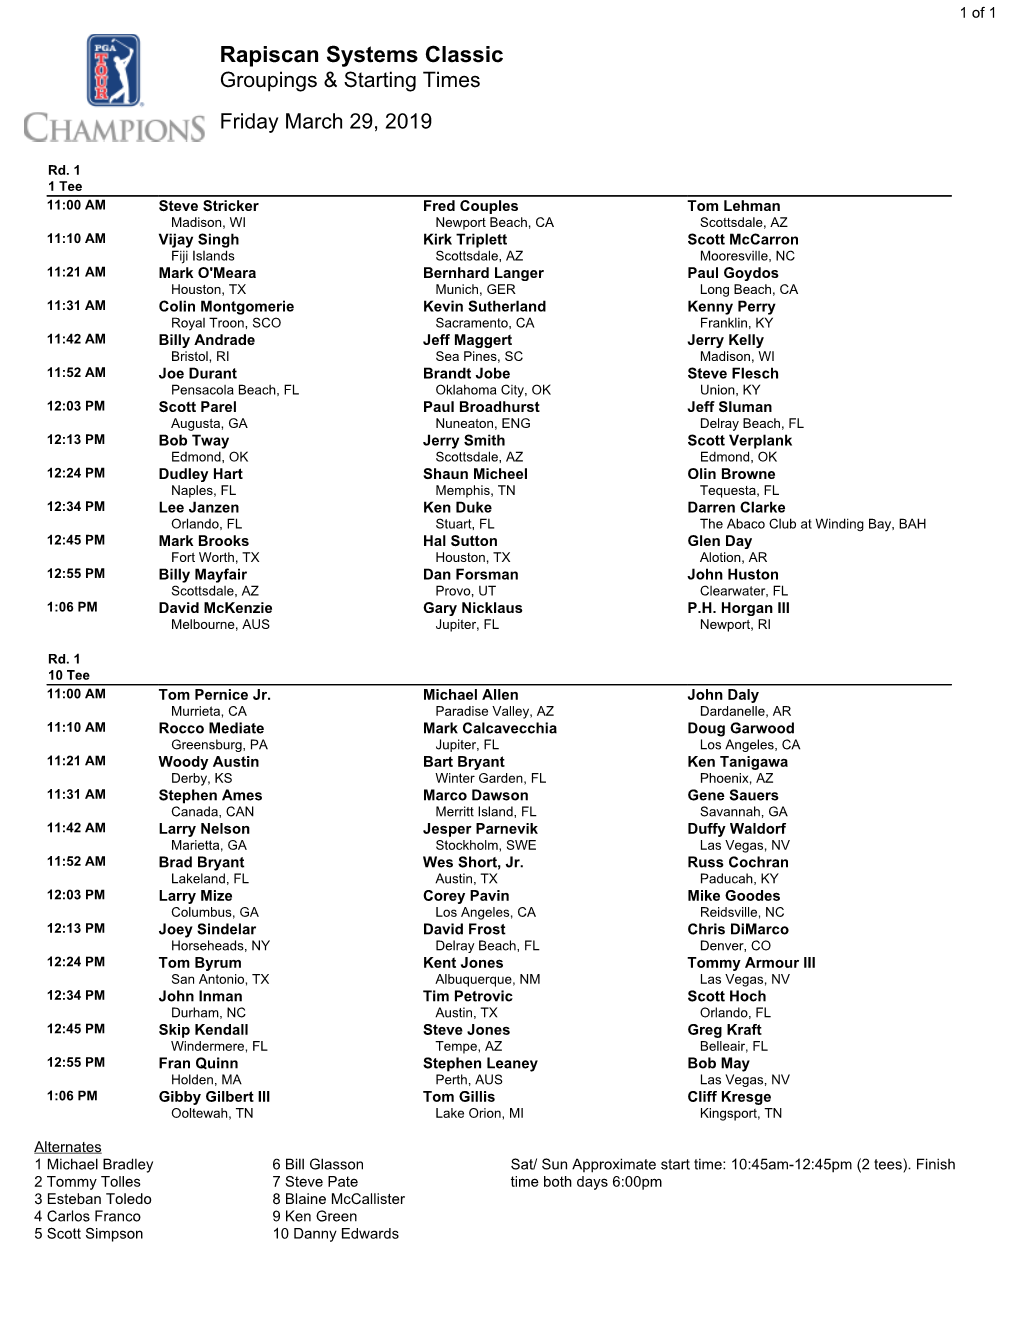 Rapiscan Systems Classic Groupings & Starting Times Friday March 29, 2019